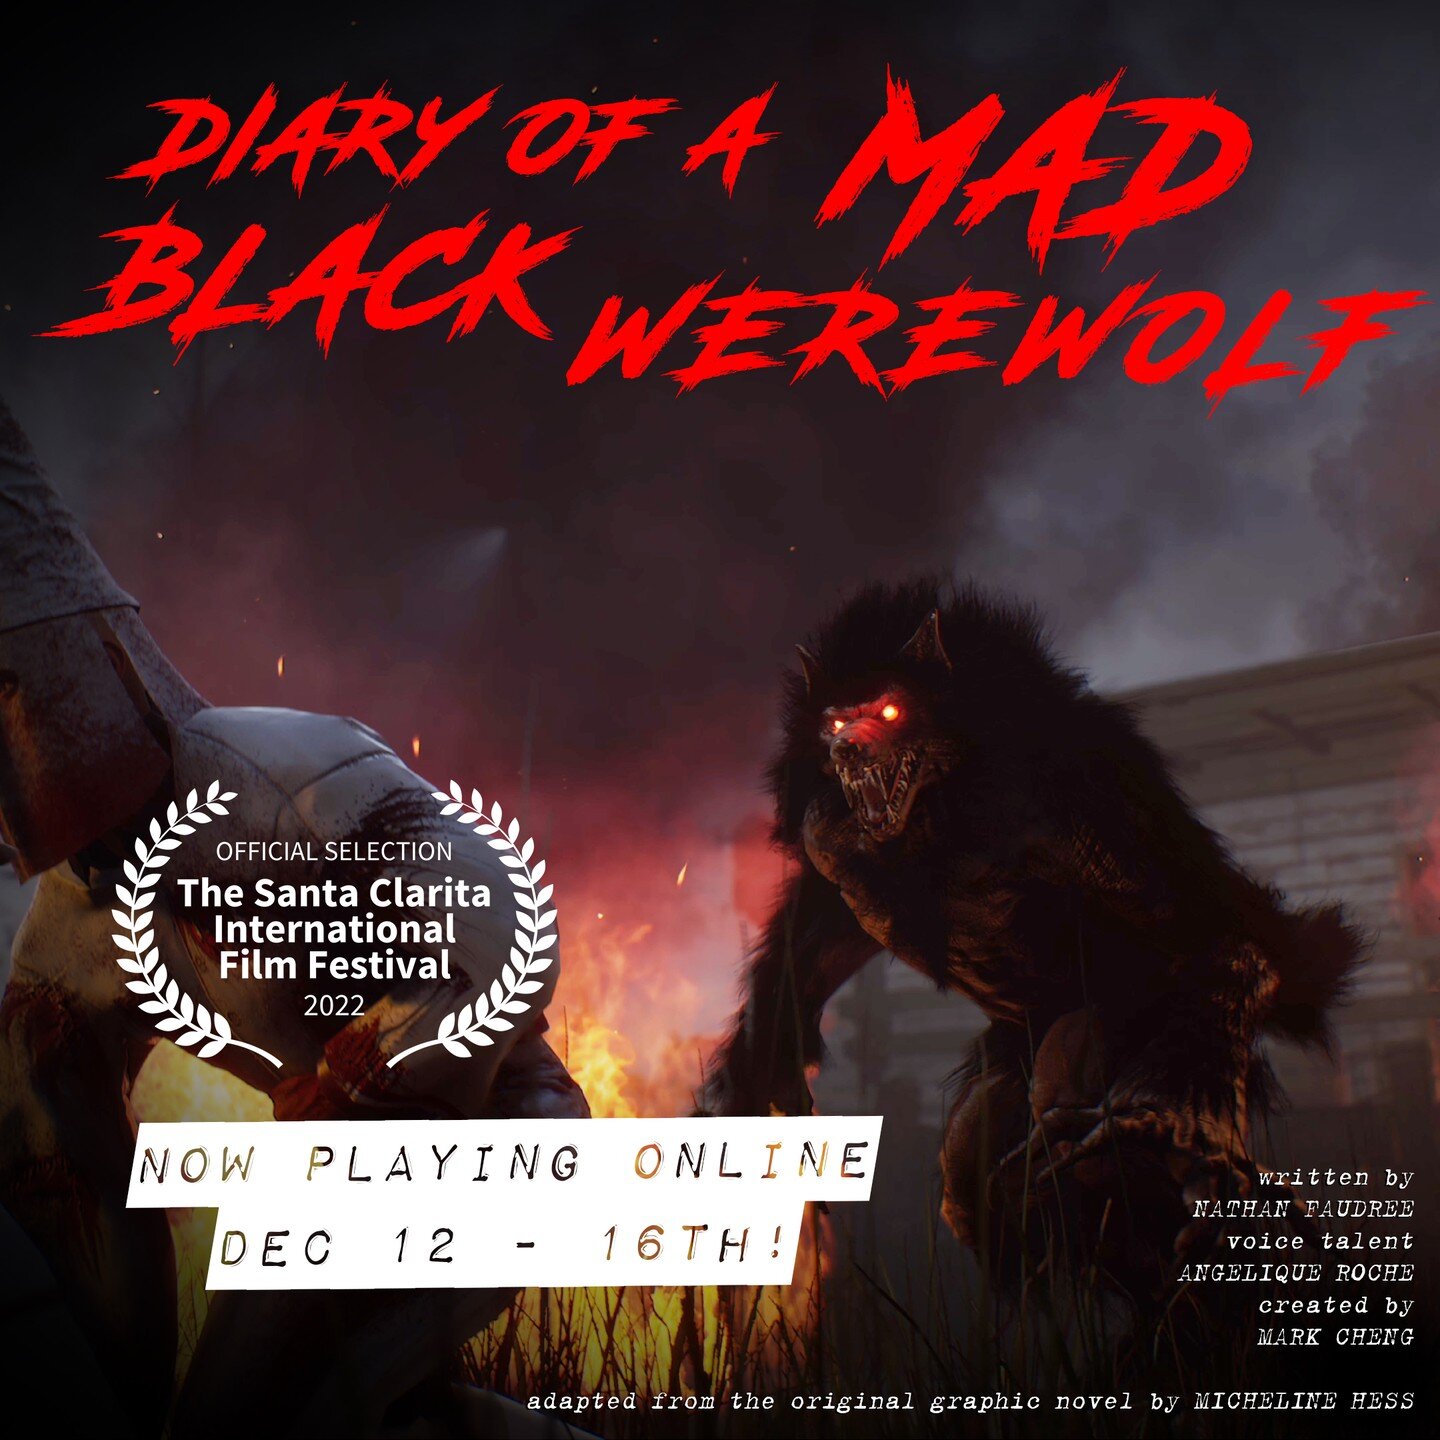 Link in profile to watch DIARY OF A MAD BLACK WEREWOLF online! $2.50 tickets! 
Director notes: &quot;A beast that feeds on hate recognizes that it will never starve. It's sad, painful, real and terrifying all at once. When I first read the graphic no